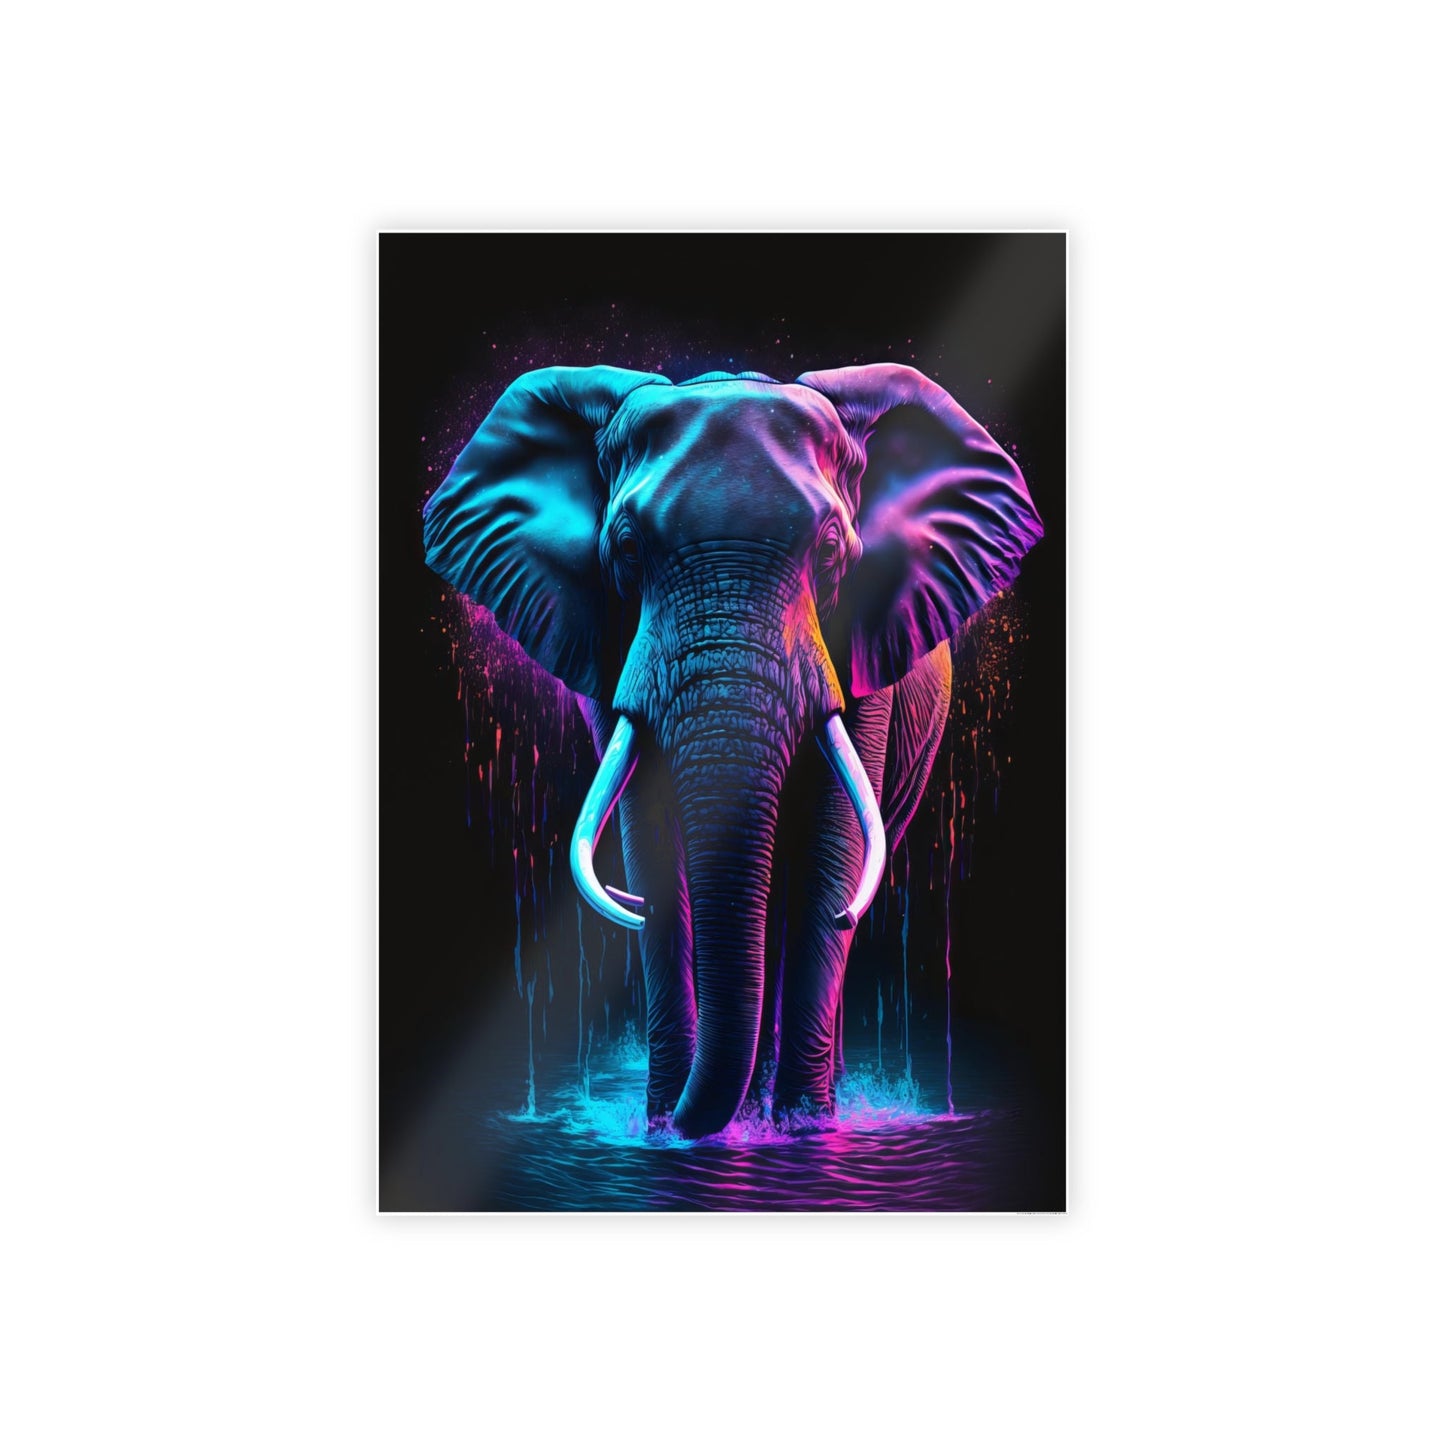 Elephant Elegance: Natural Canvas Wall Art for the Home